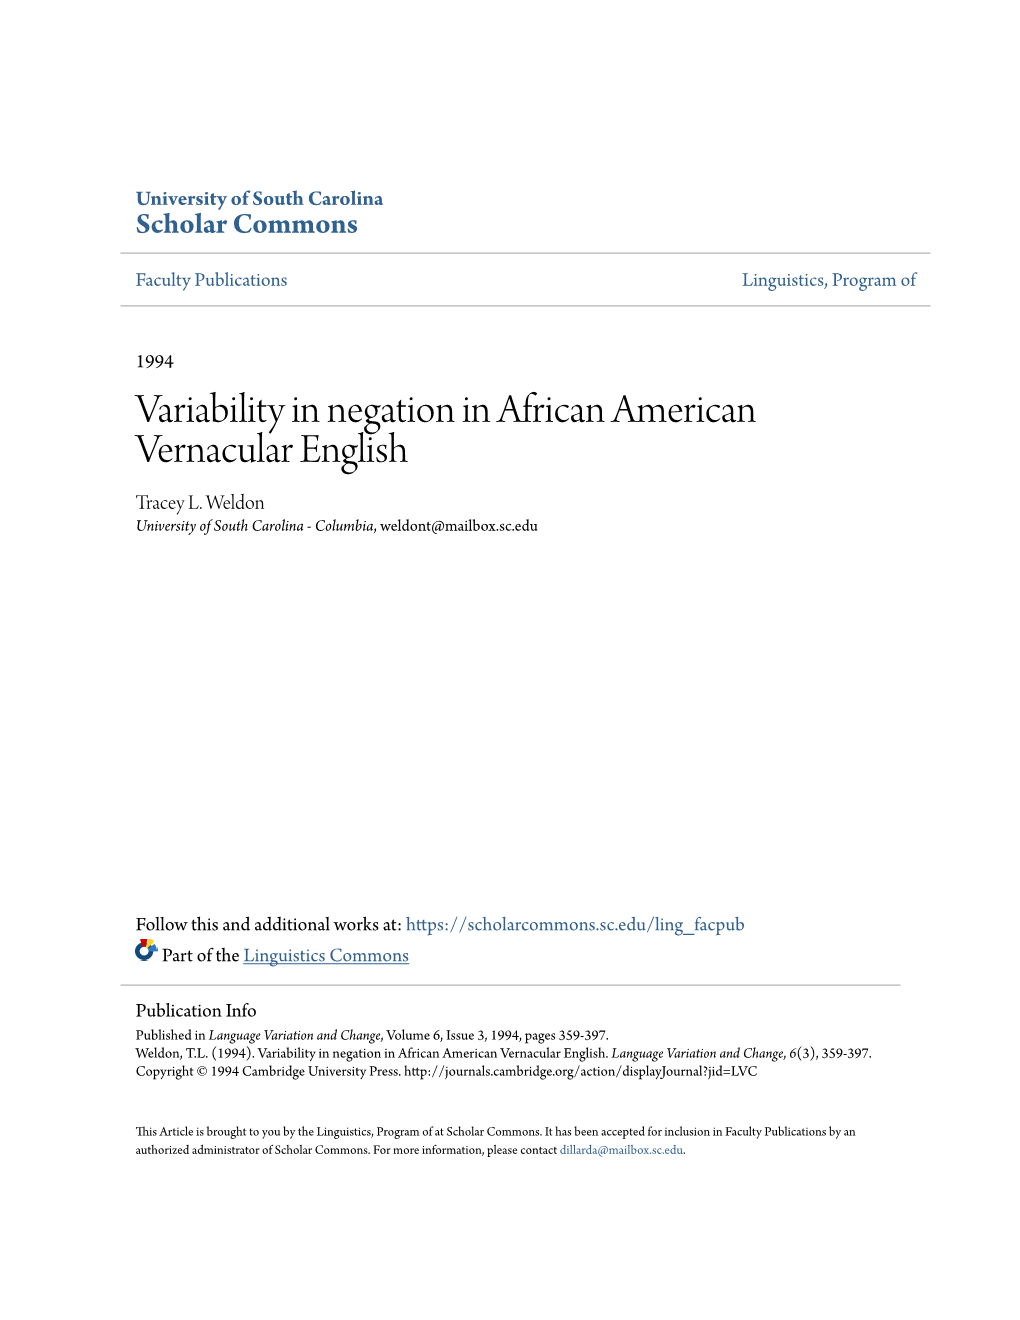 Variability in Negation in African American Vernacular English Tracey L